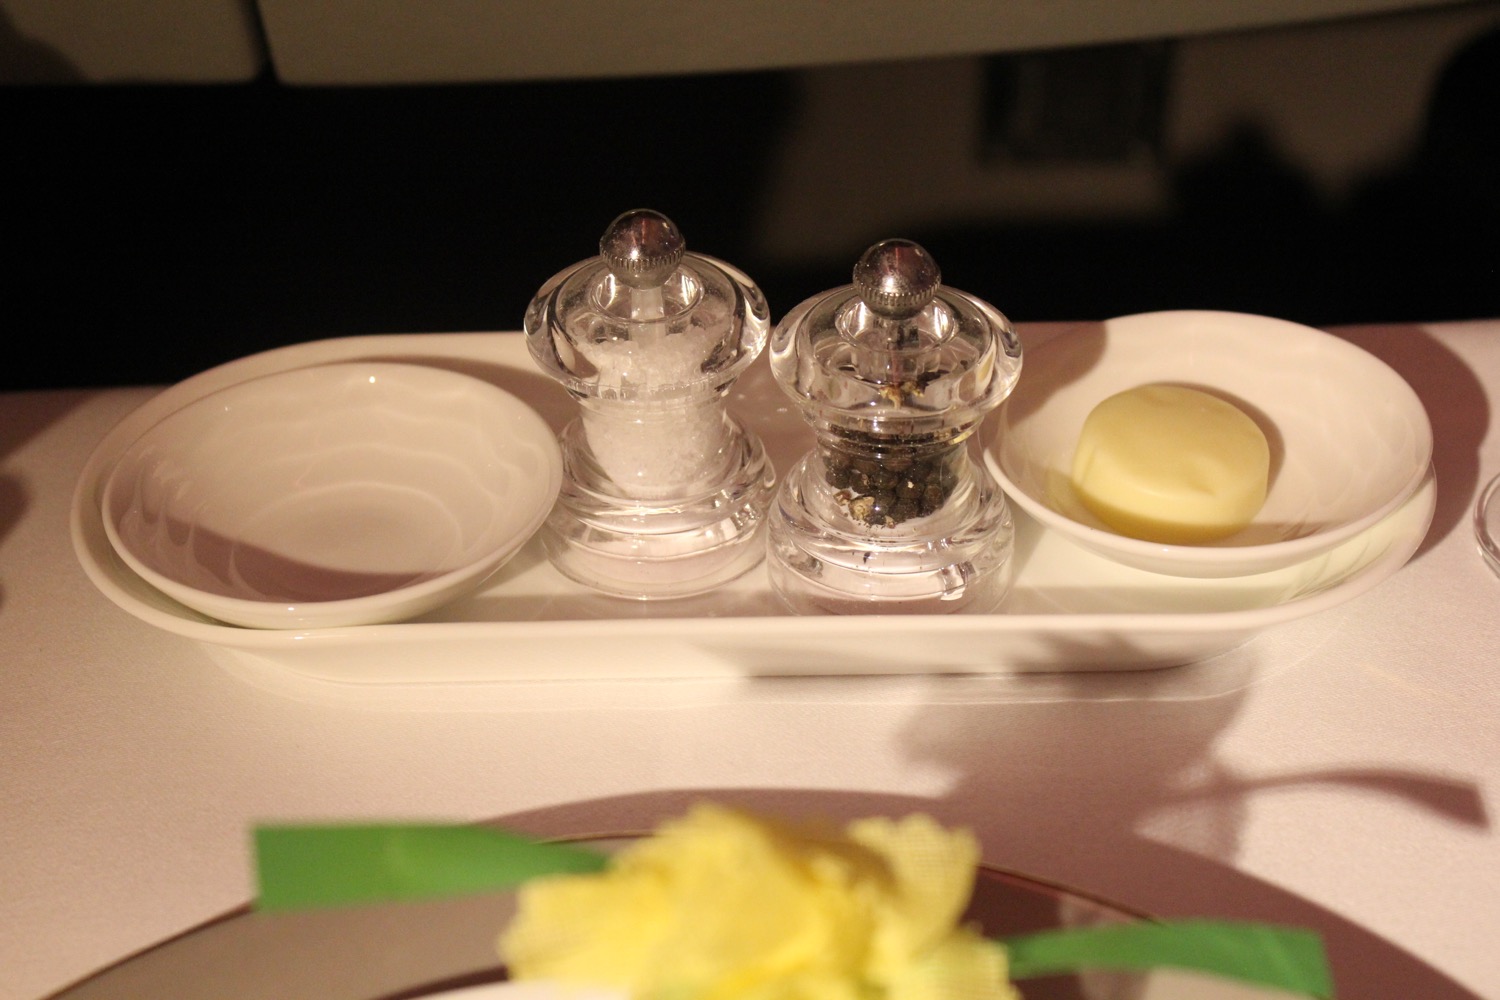 salt and pepper shakers on a tray